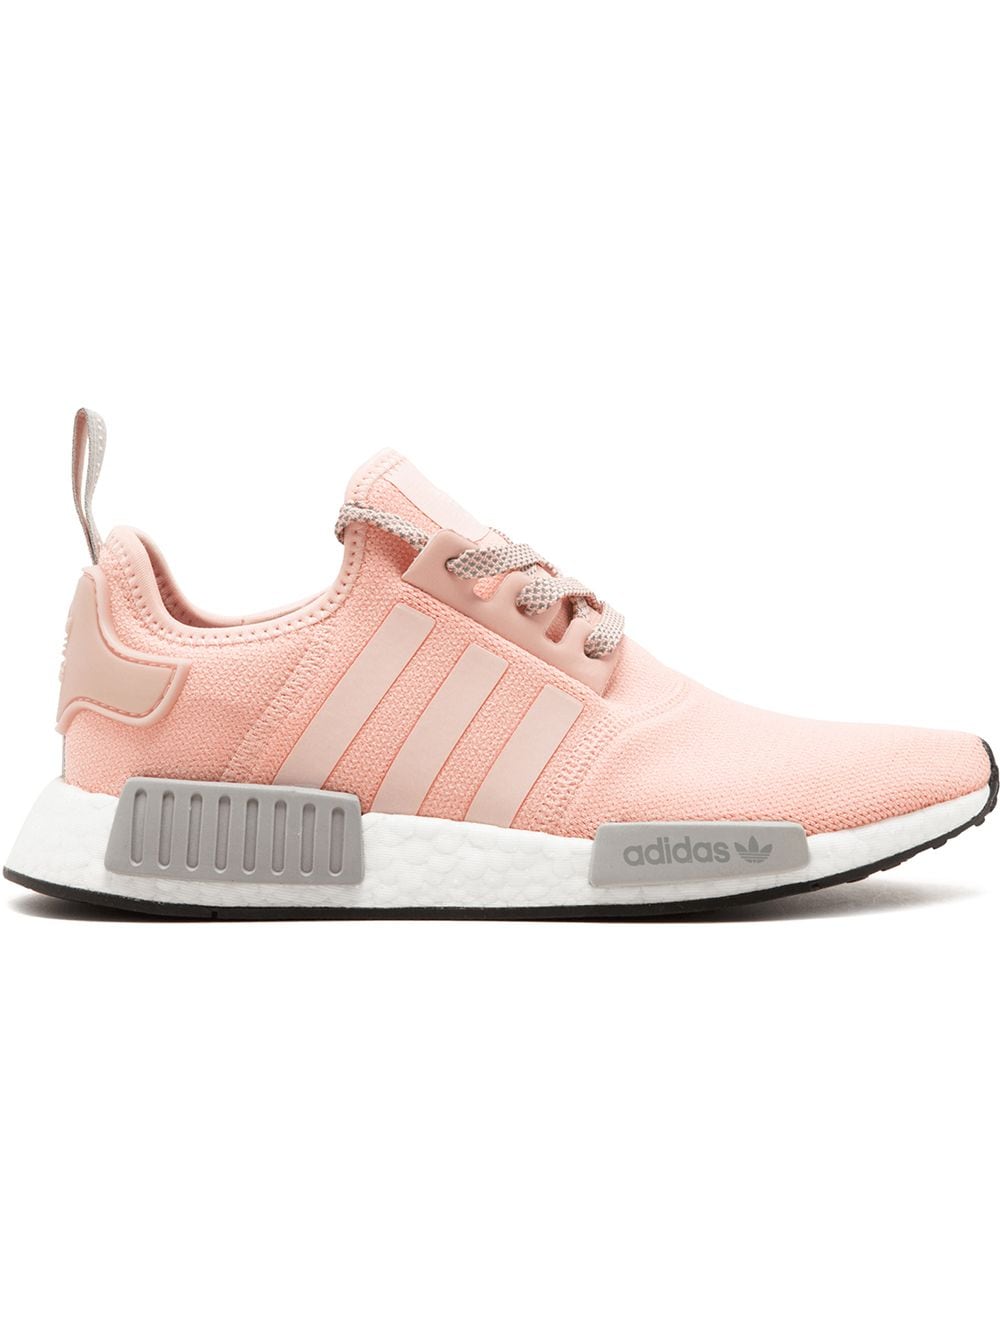 adidas NMD R1 low-top sneakers